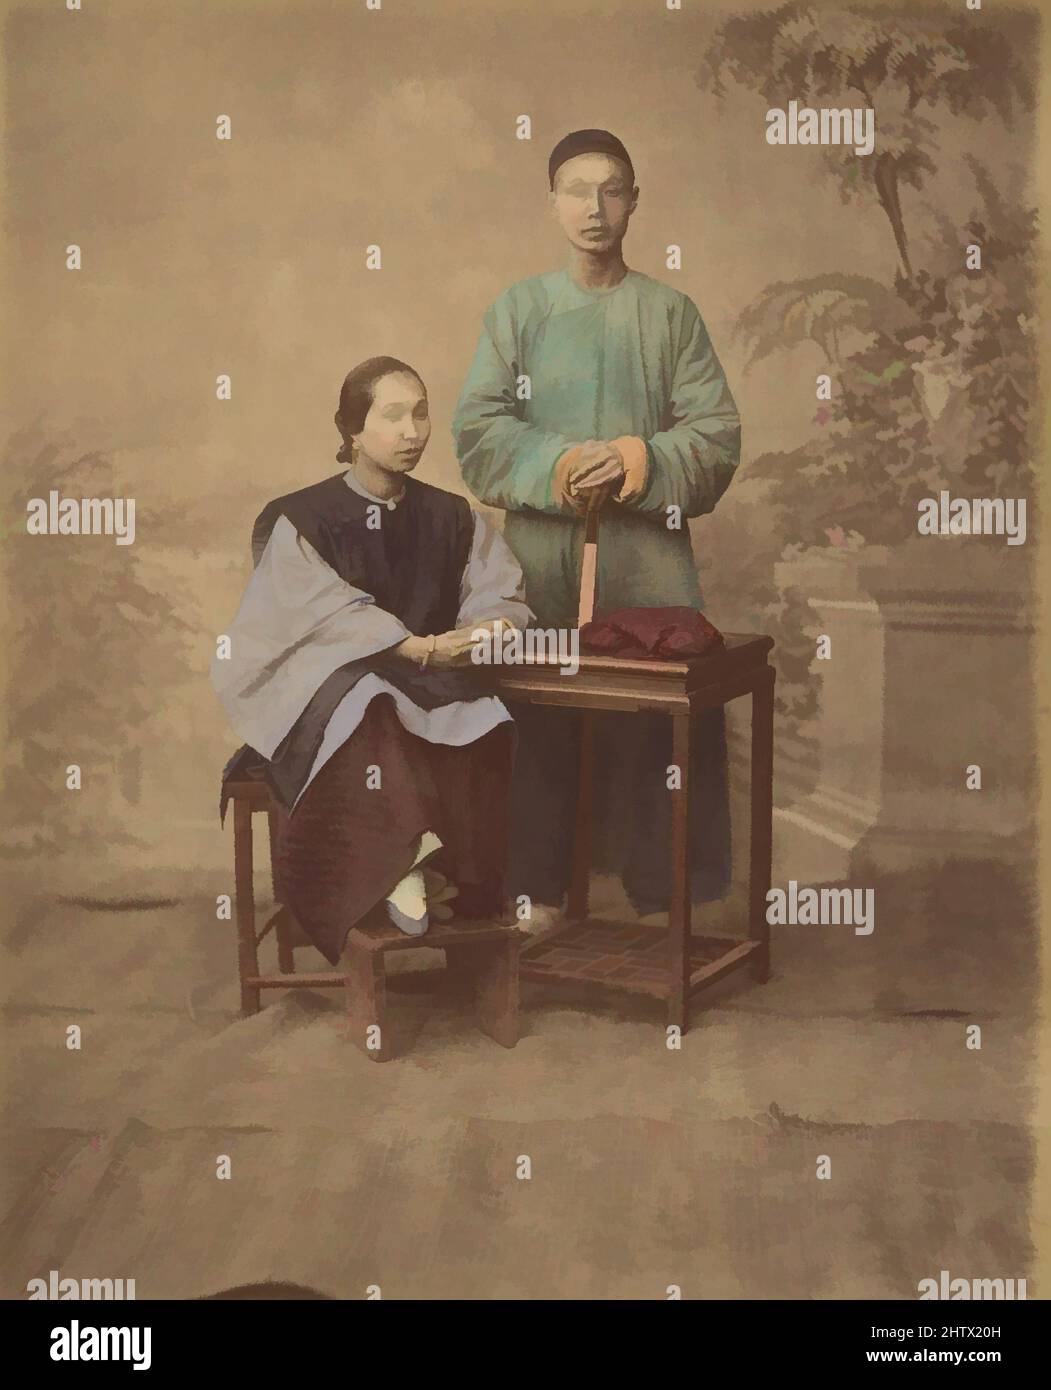 Art inspired by Portrait of a Chinese Couple, 1870s, Albumen silver print from glass negative, 23.7 x 19.2 cm (9 5/16 x 7 9/16 in.), Photographs, Unknown, Classic works modernized by Artotop with a splash of modernity. Shapes, color and value, eye-catching visual impact on art. Emotions through freedom of artworks in a contemporary way. A timeless message pursuing a wildly creative new direction. Artists turning to the digital medium and creating the Artotop NFT Stock Photo